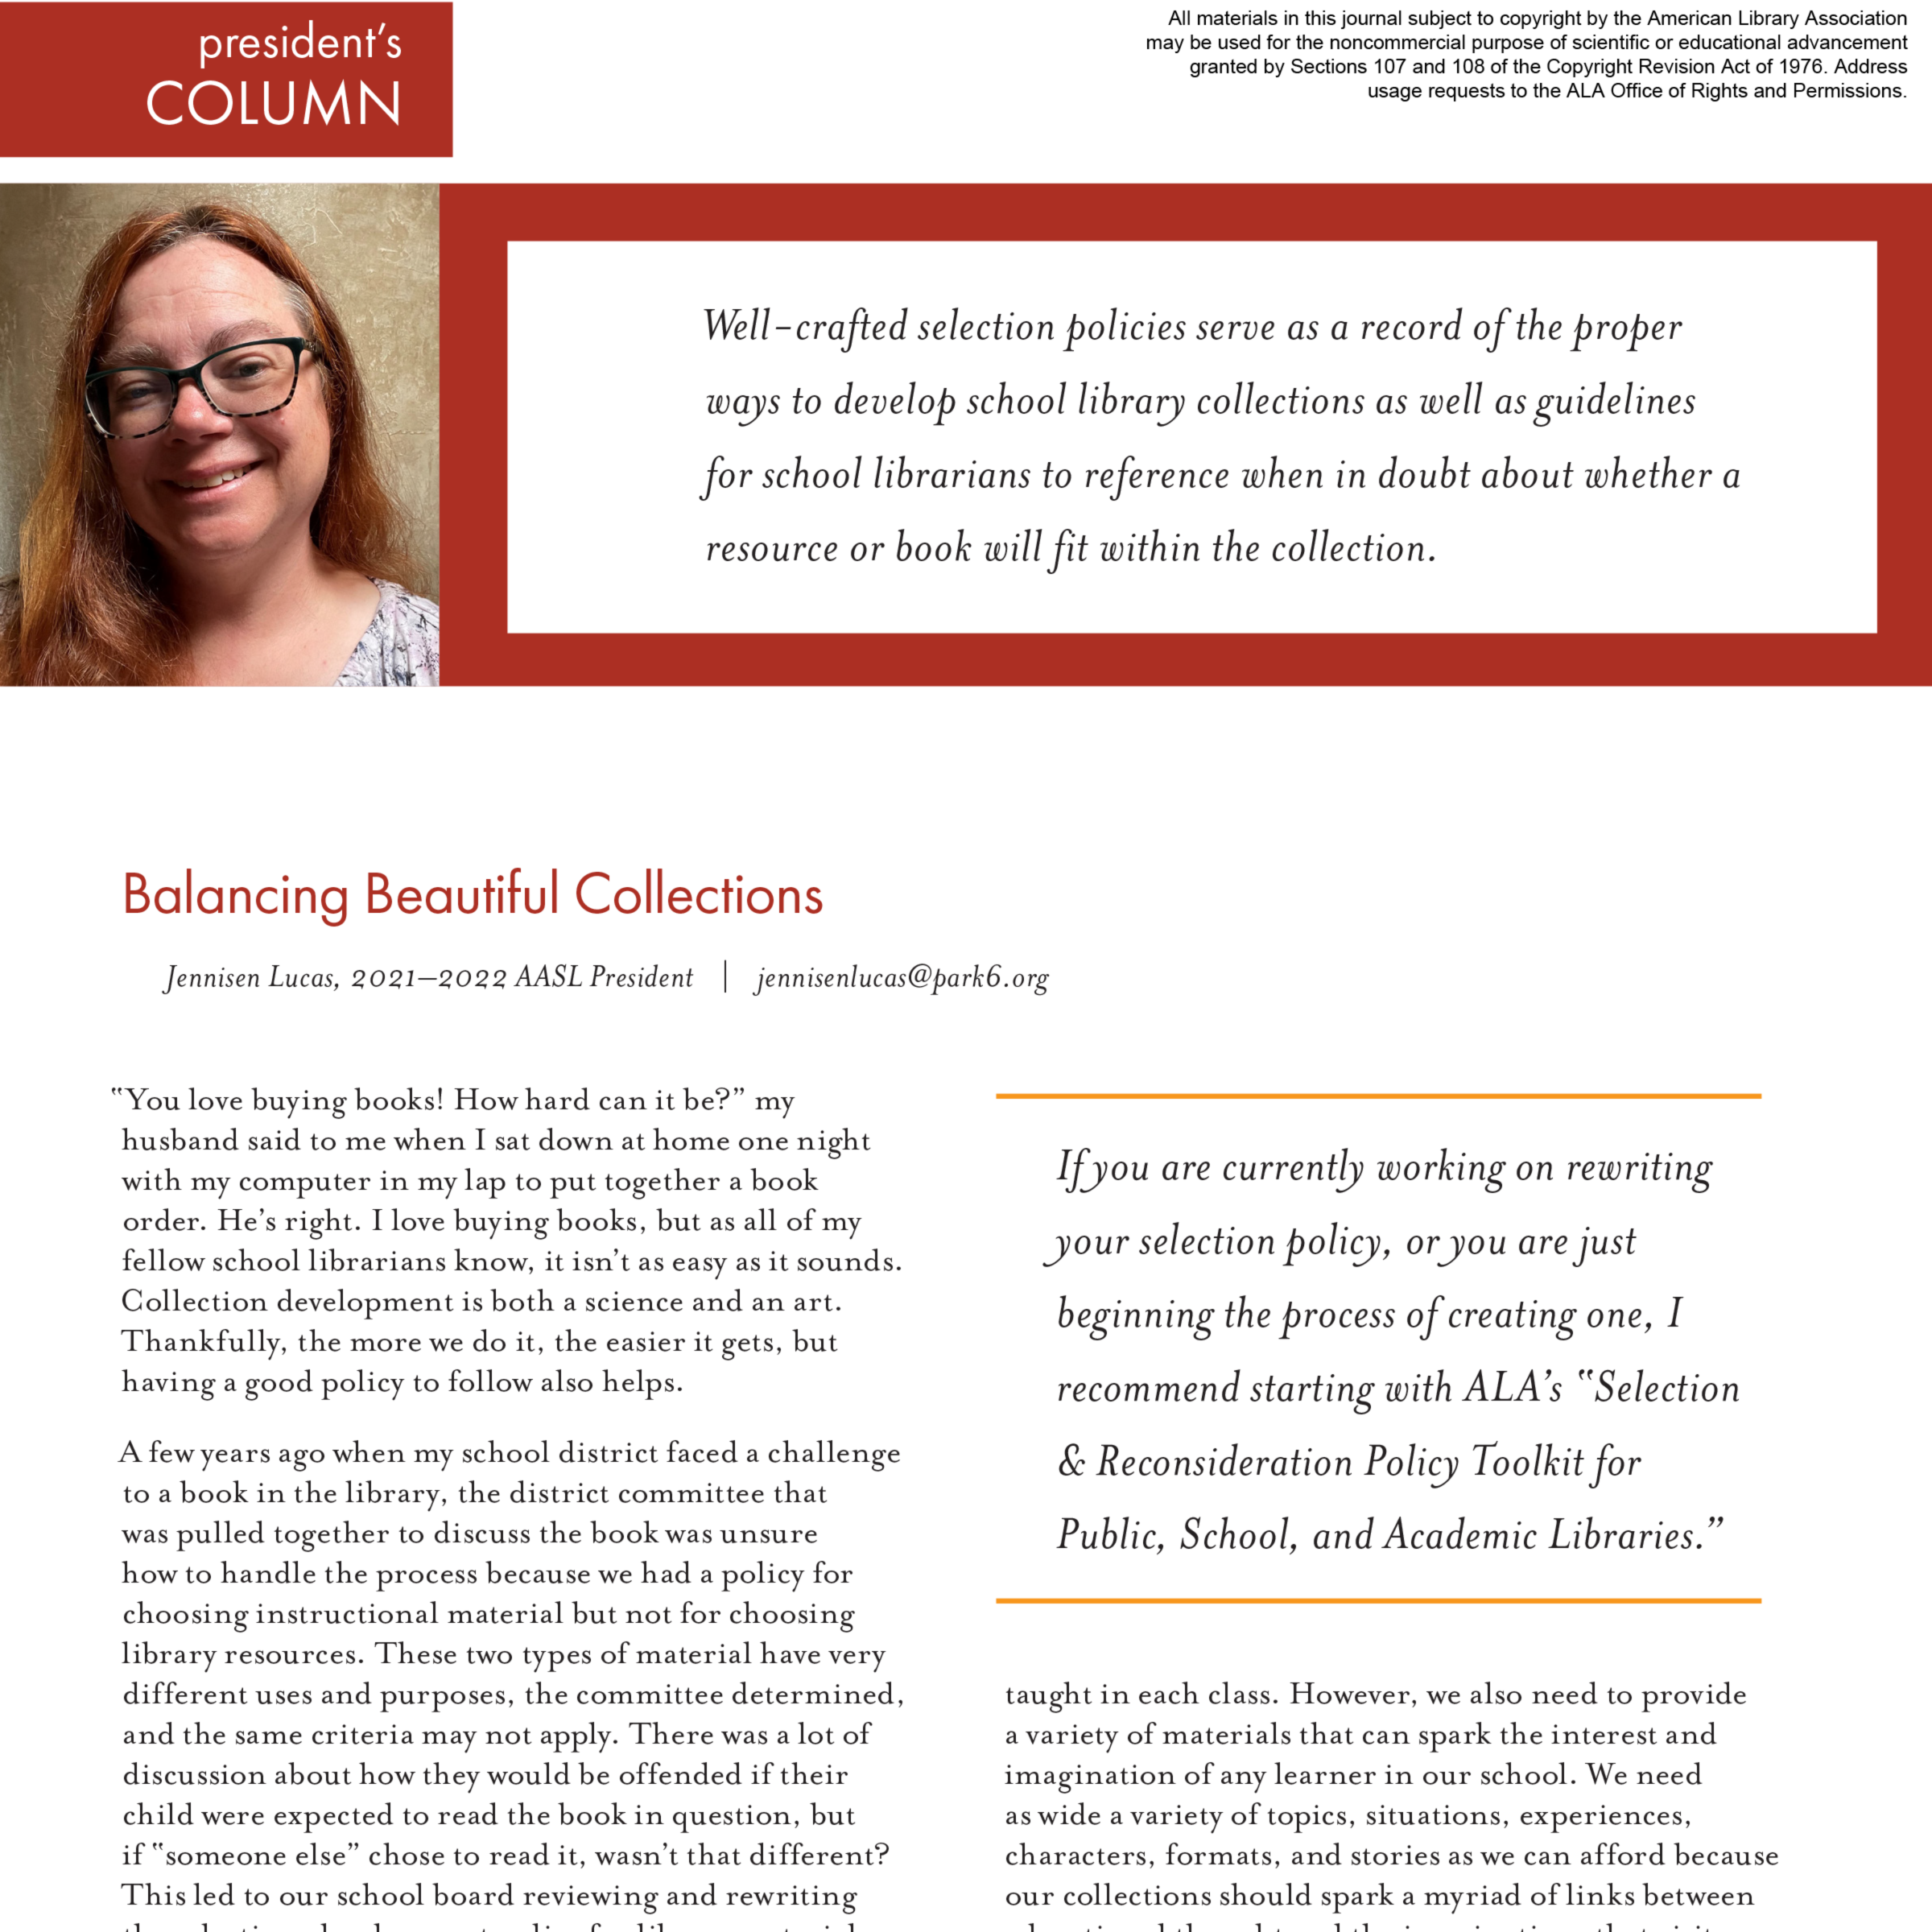 President’s Column: Balancing Beautiful Collections (Volume 50, No.5, pgs 4-5)